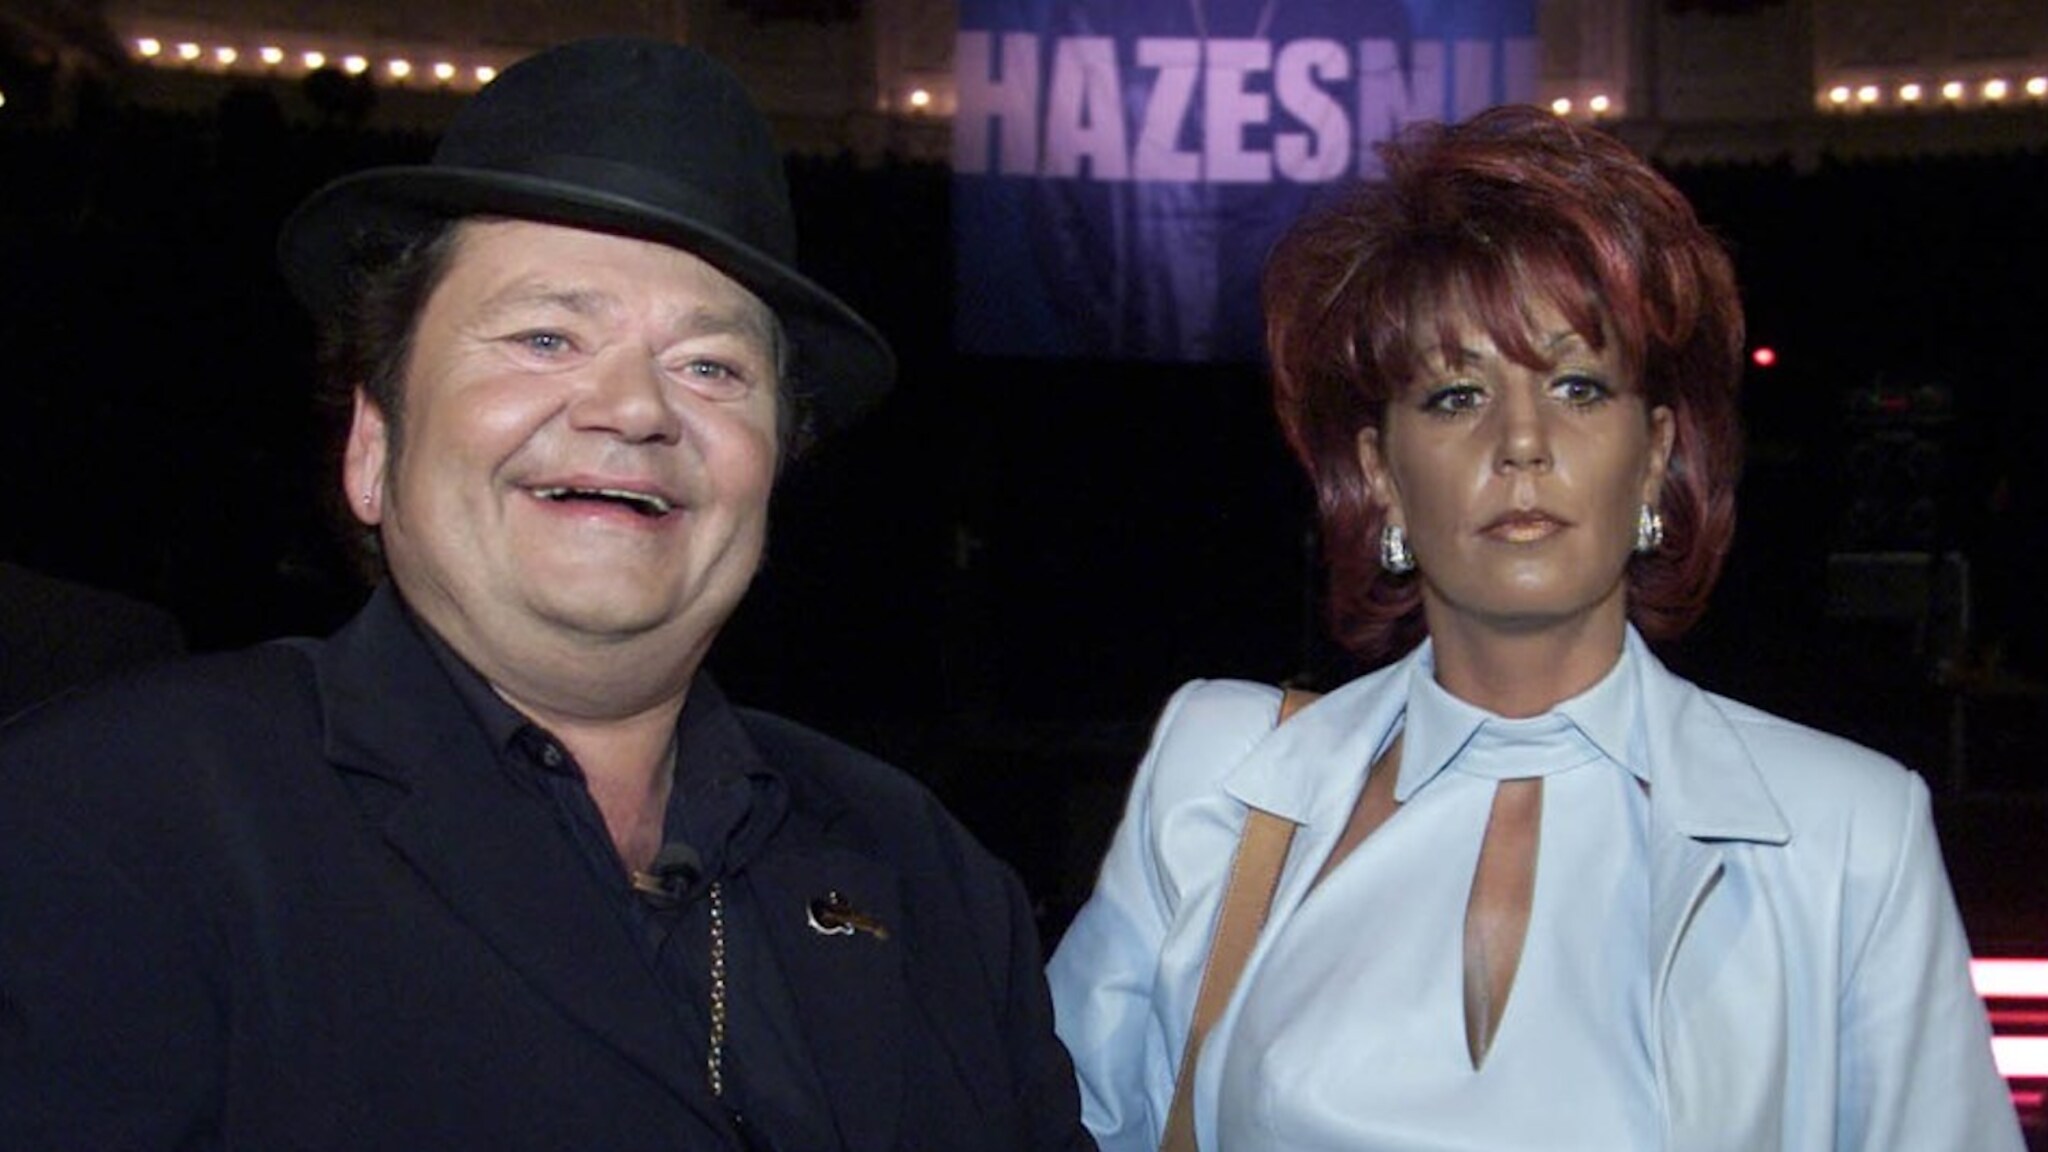 Rachel Hazes looks back on wedding day: “Why did you get married so quickly?”